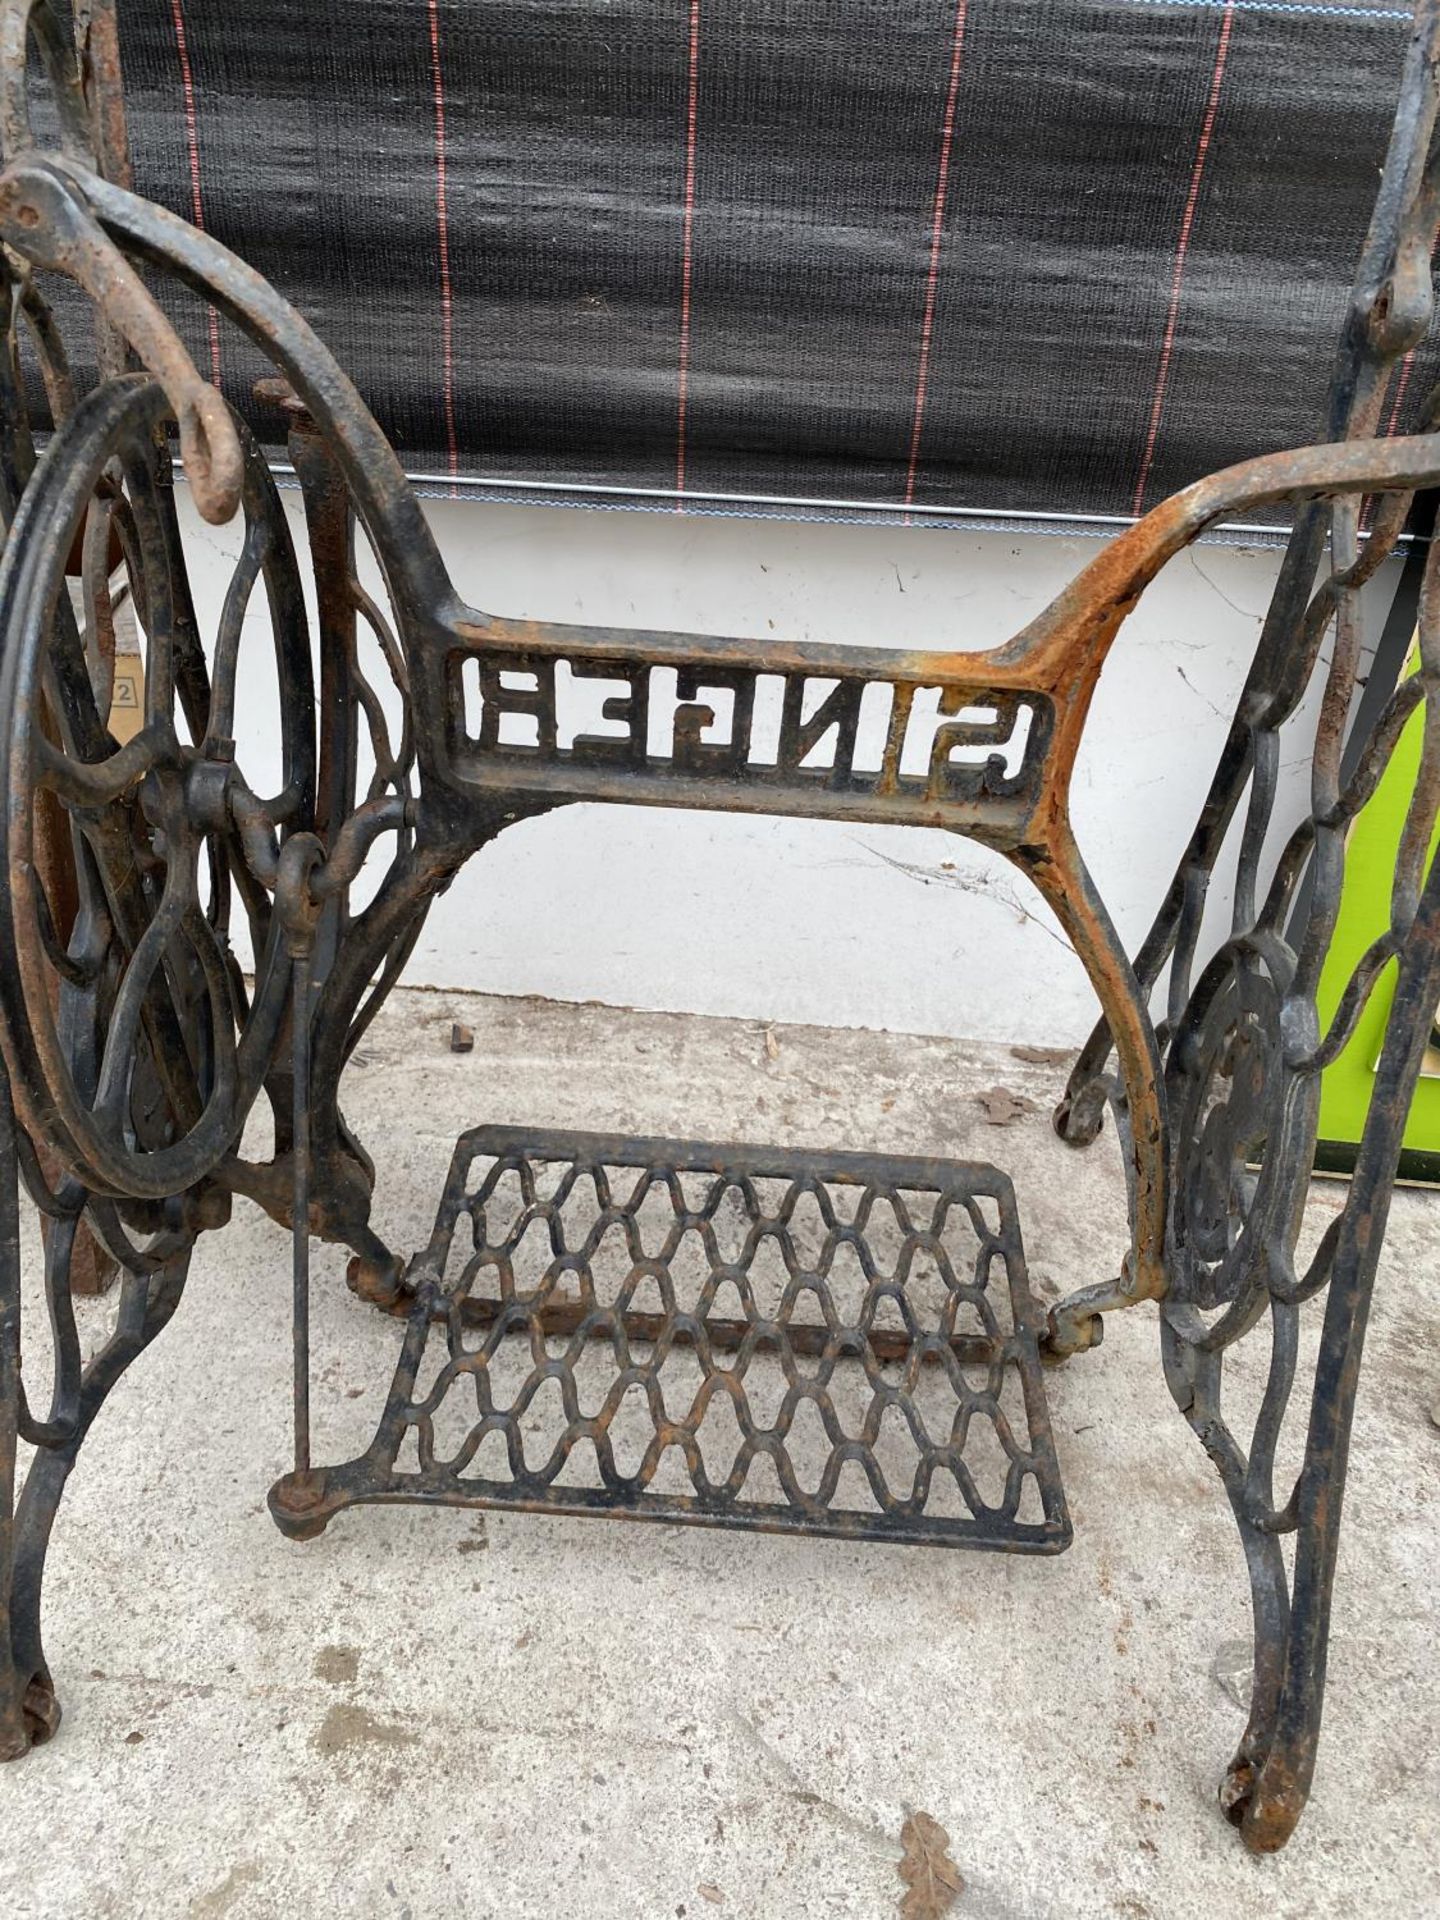 A SECTION OF DECORATIVE WROUGHT IRON RAILING AND A SINGER TREADLE BASE - Image 3 of 5